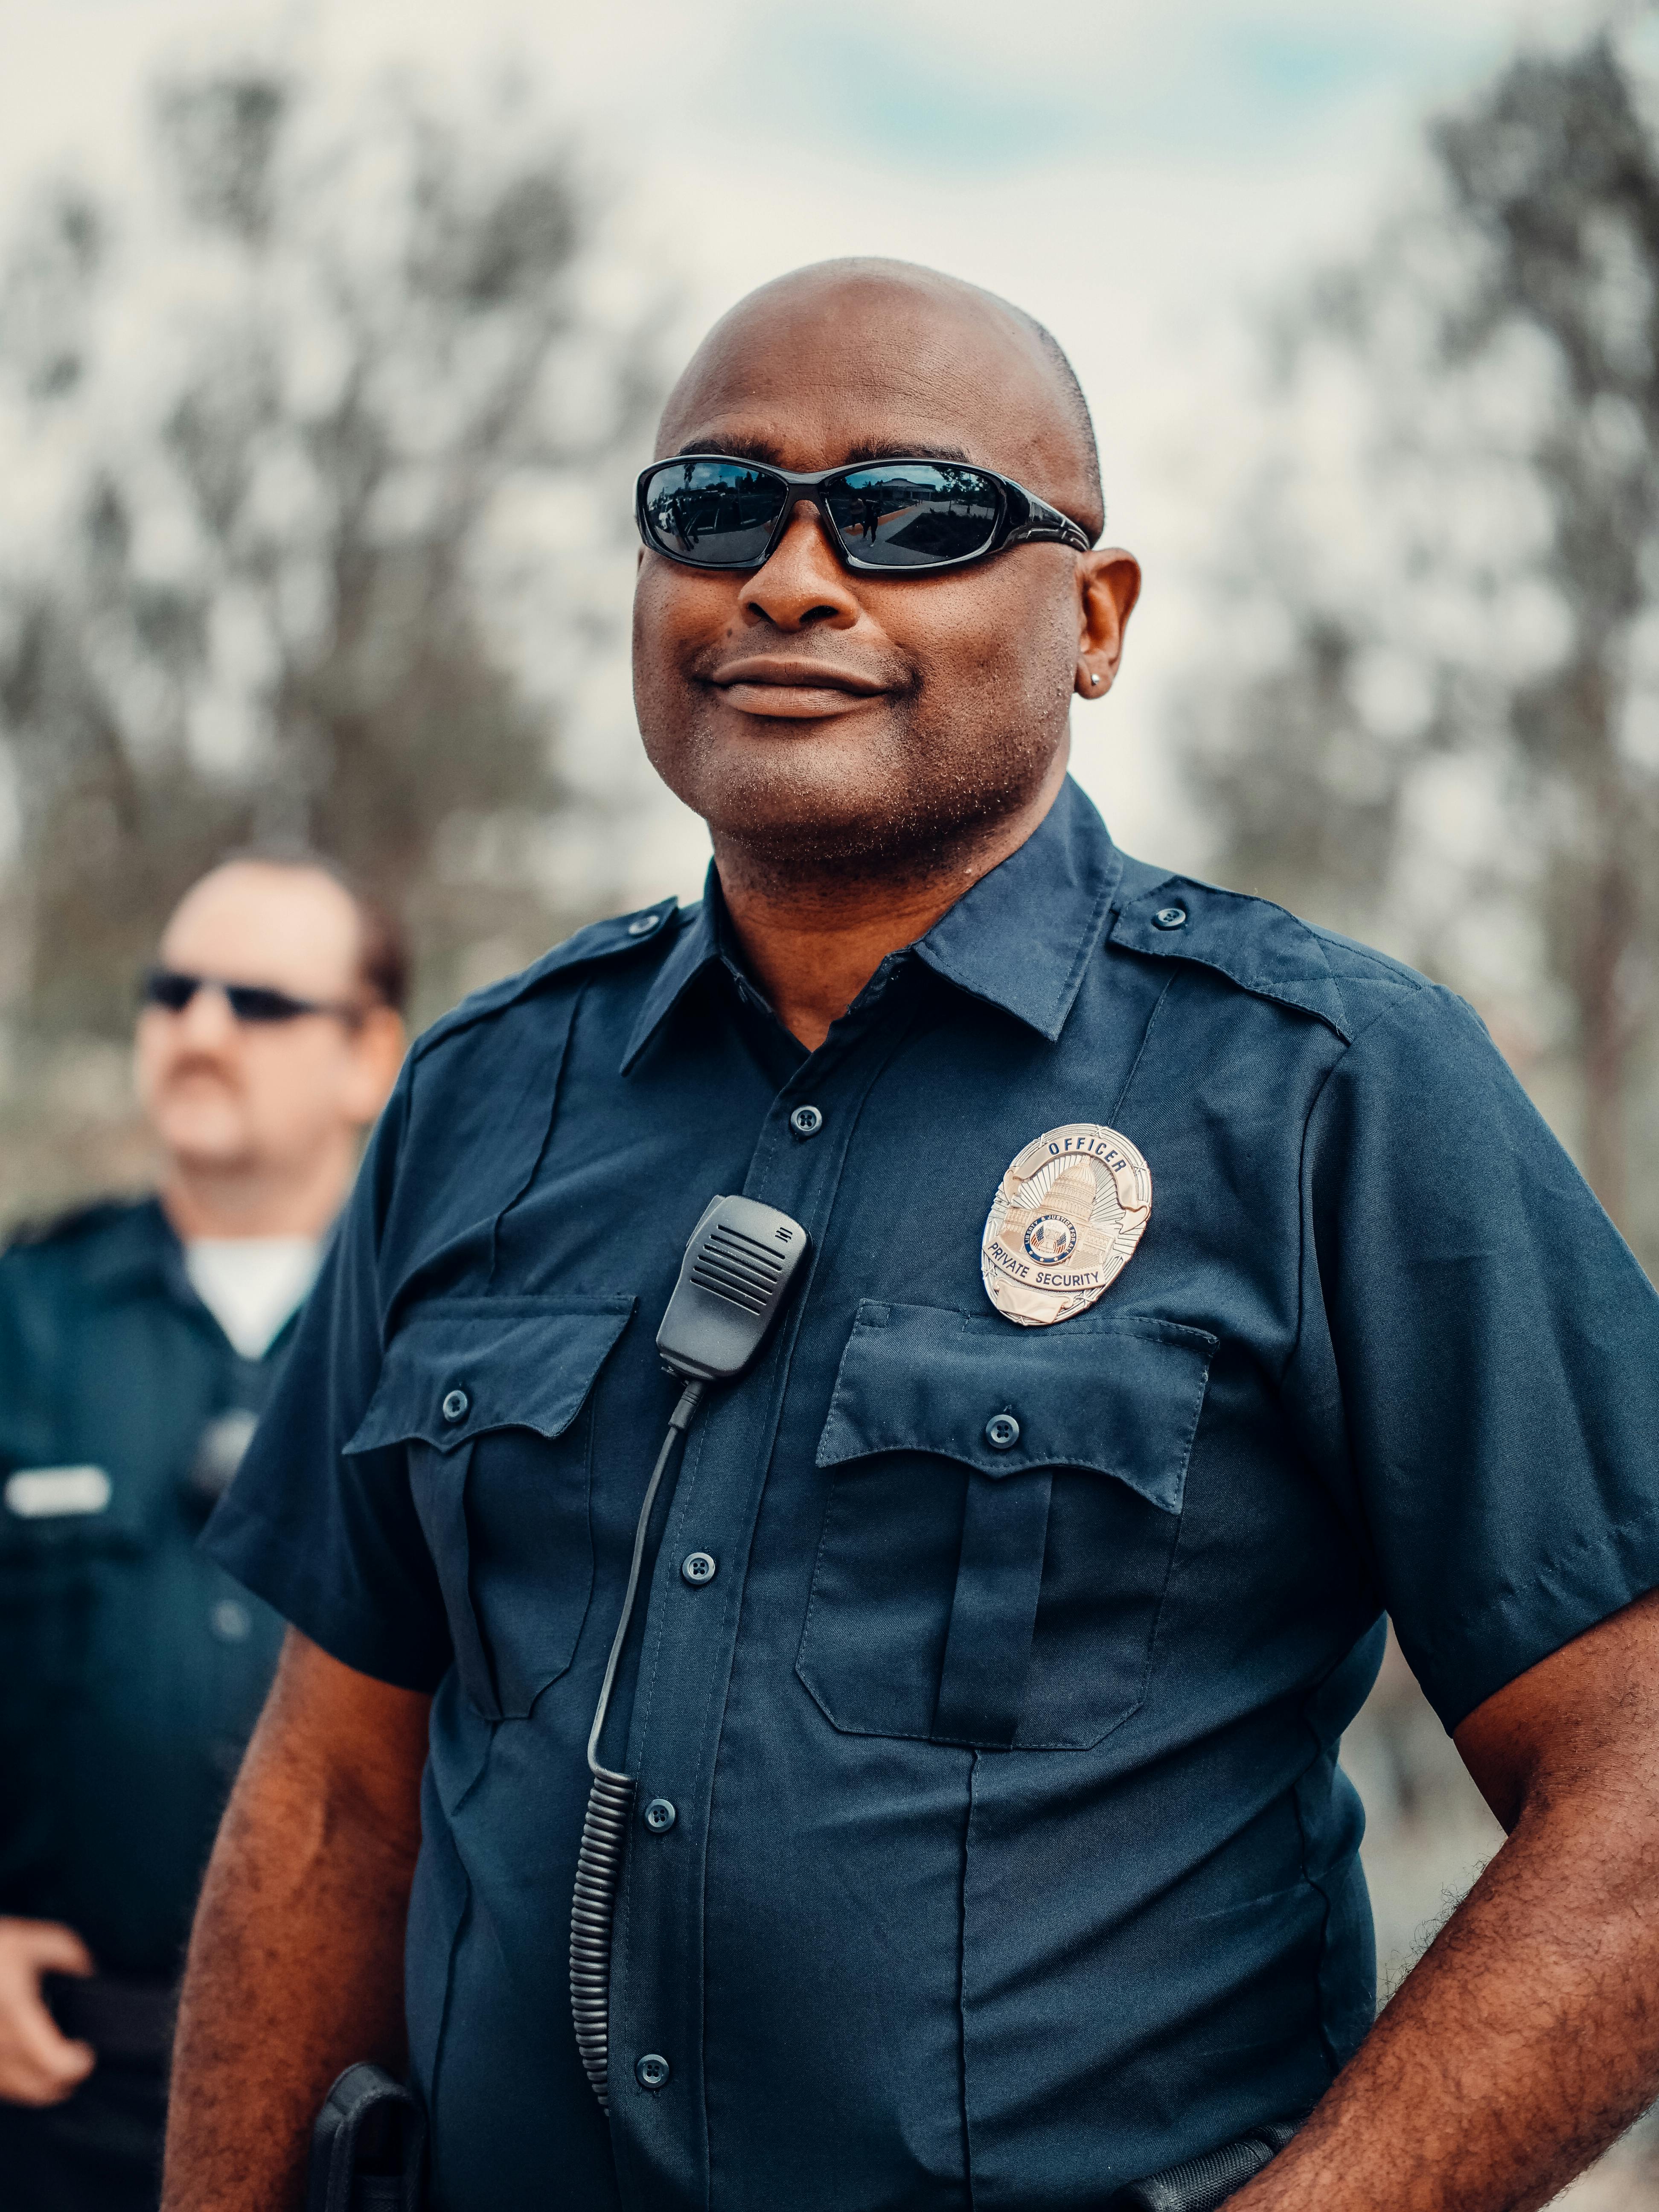 A police officer looking smug | Source: Pexels